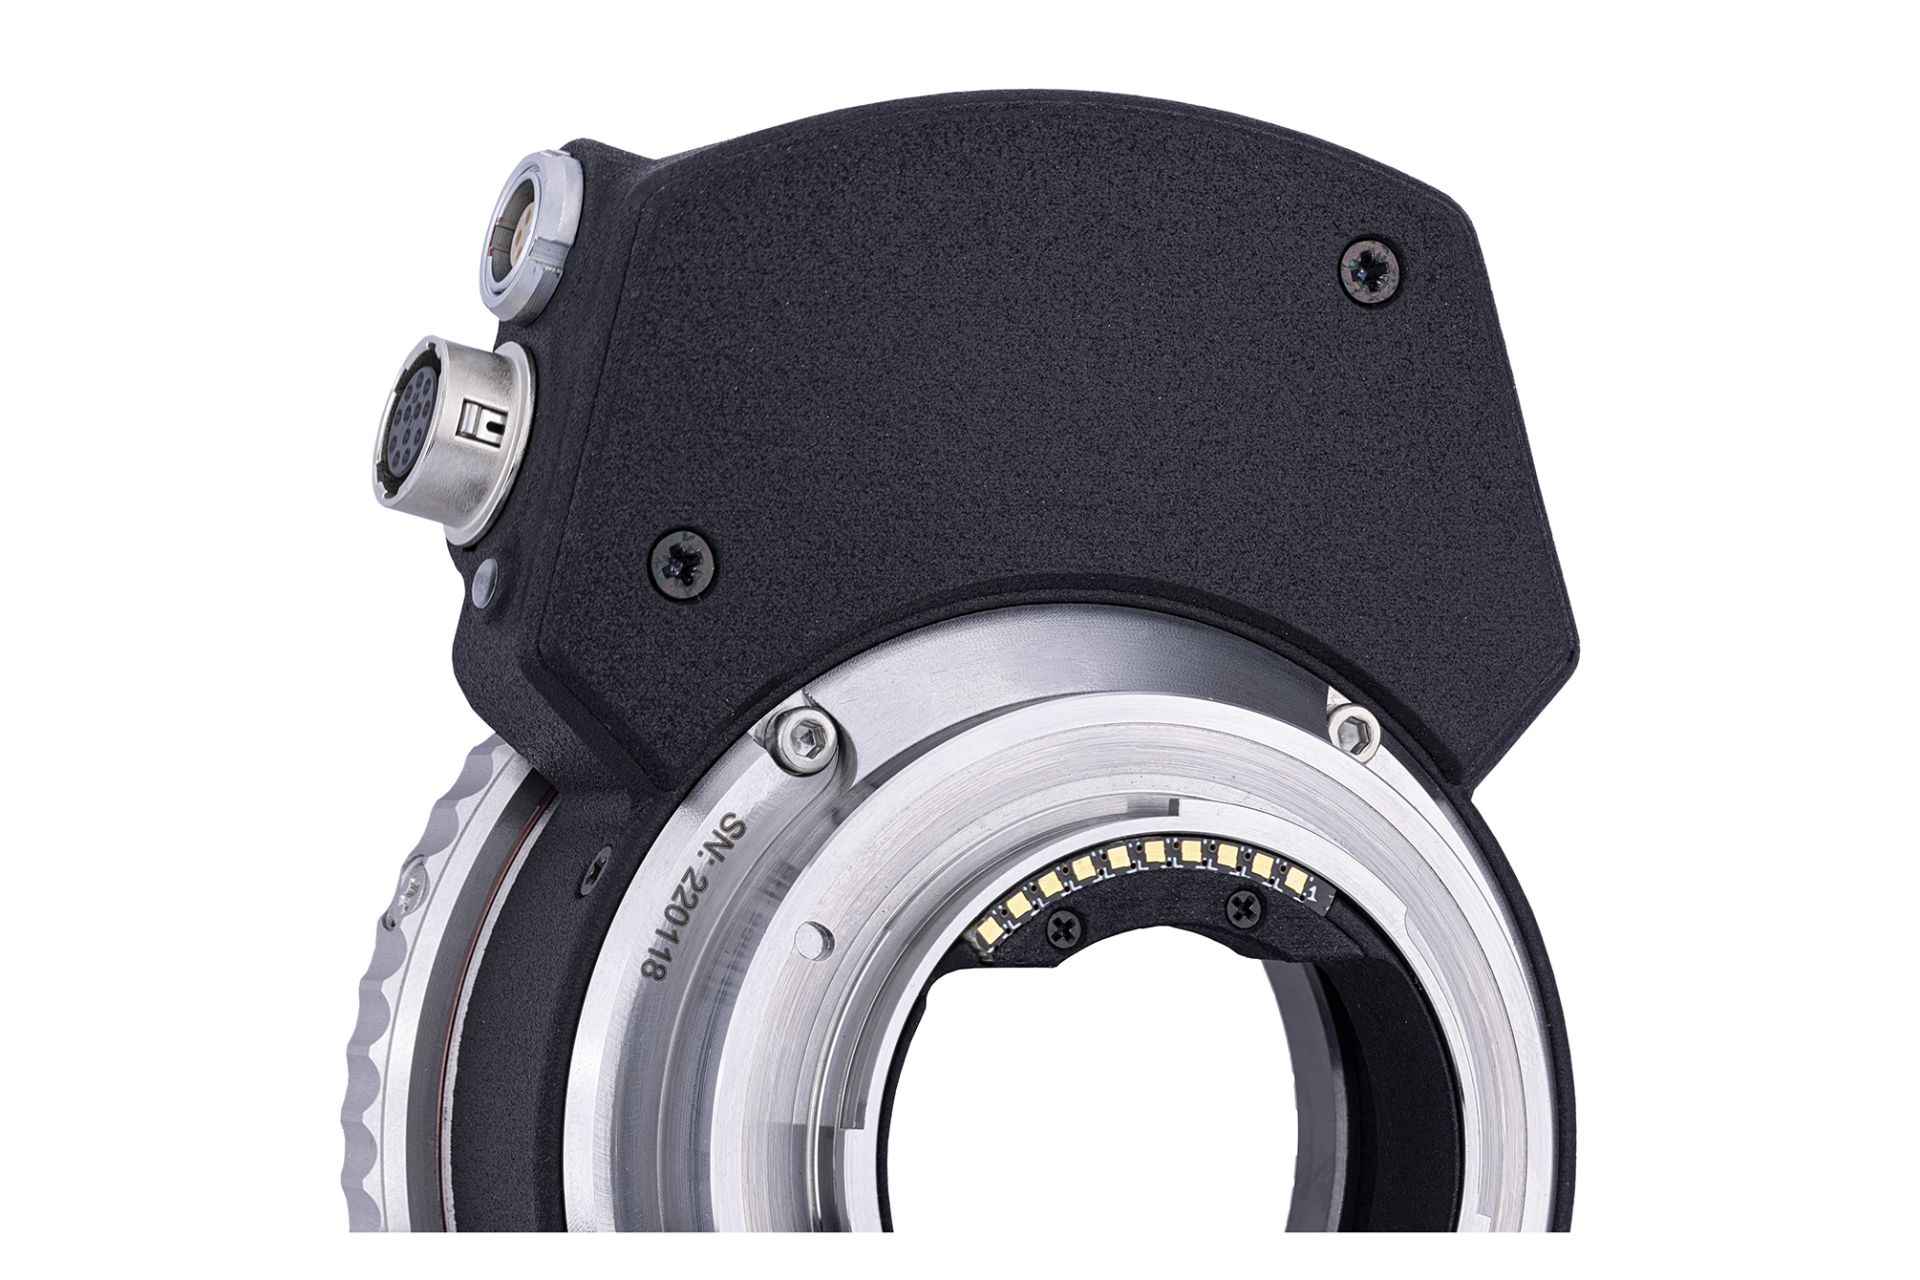 Mount Adapter E-to-PL with built-in electronics for lens meta data